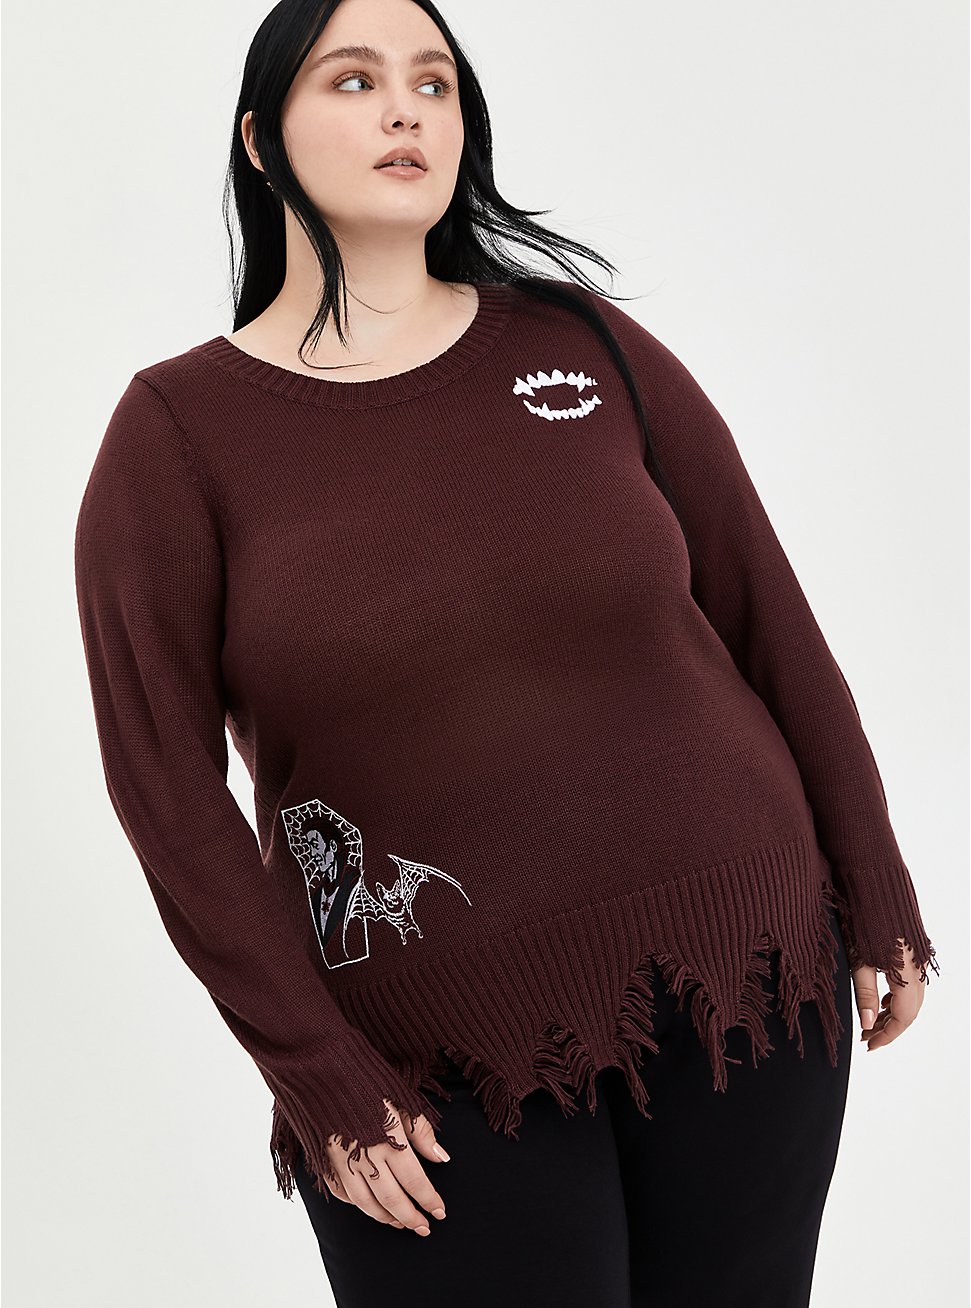 Plus Size Universal Monsters Dracula Coffin Fray Sweater - Black, BURGUNDY, hi-res